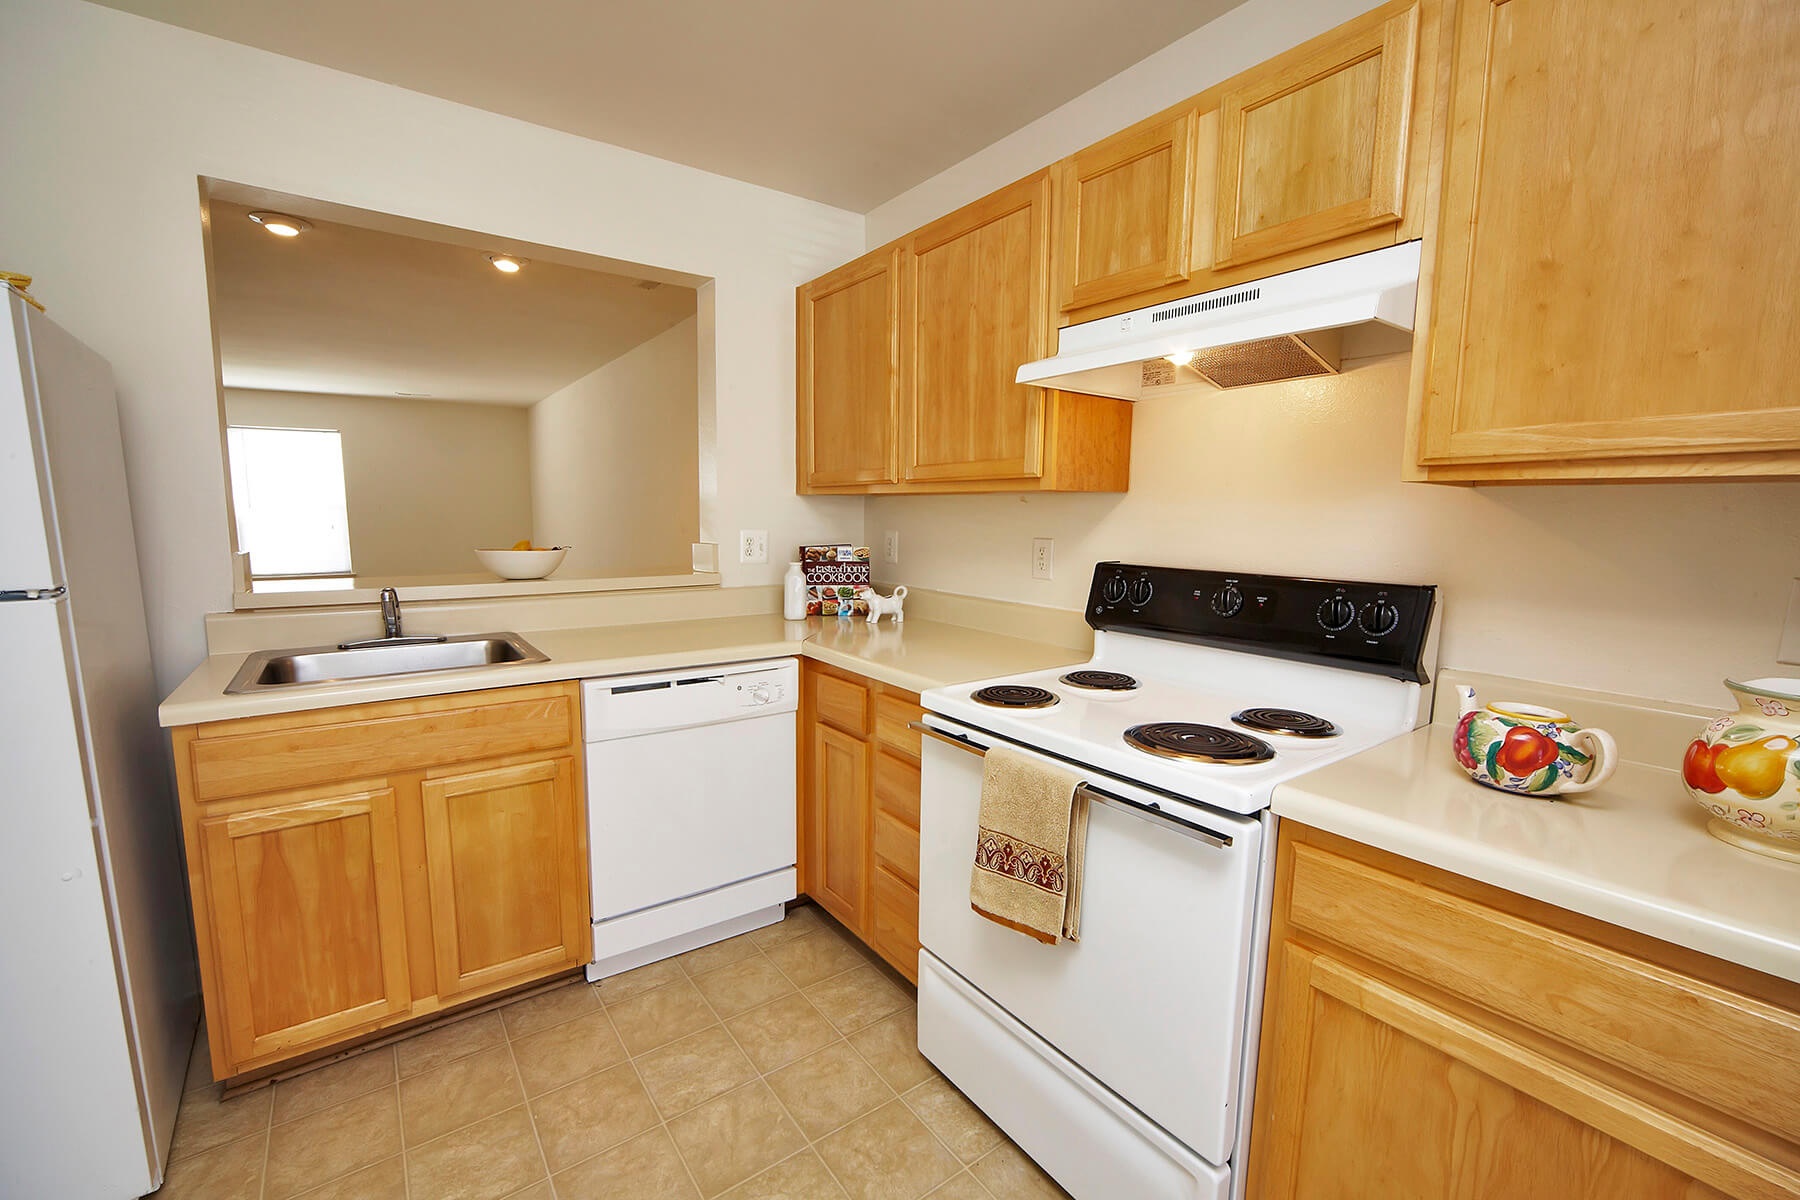 A bright kitchen with white appliances at the Broadwater Townhomes in Chester, Virginia.